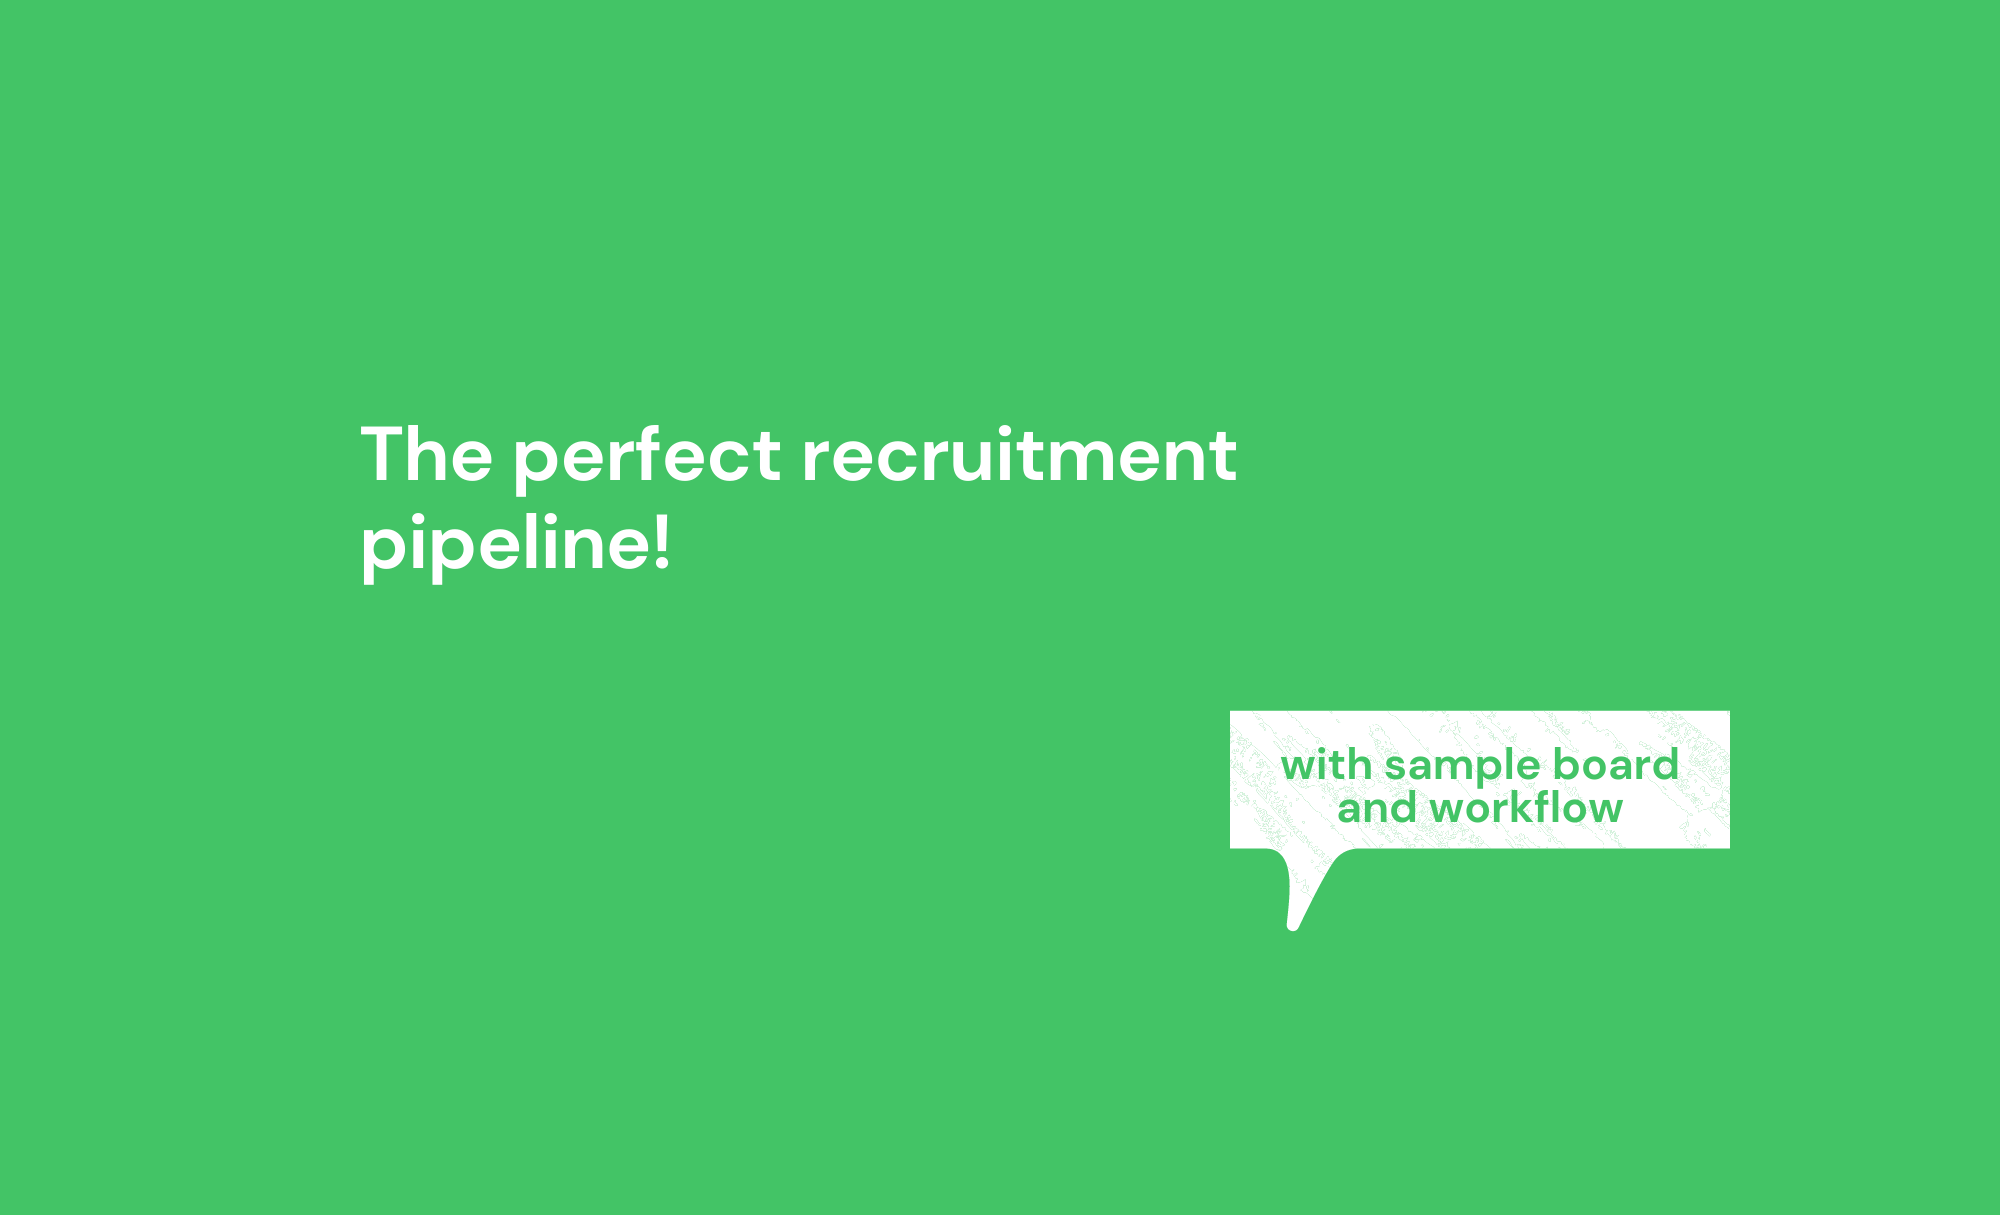 The perfect recruitment pipeline (with sample board and workflow)